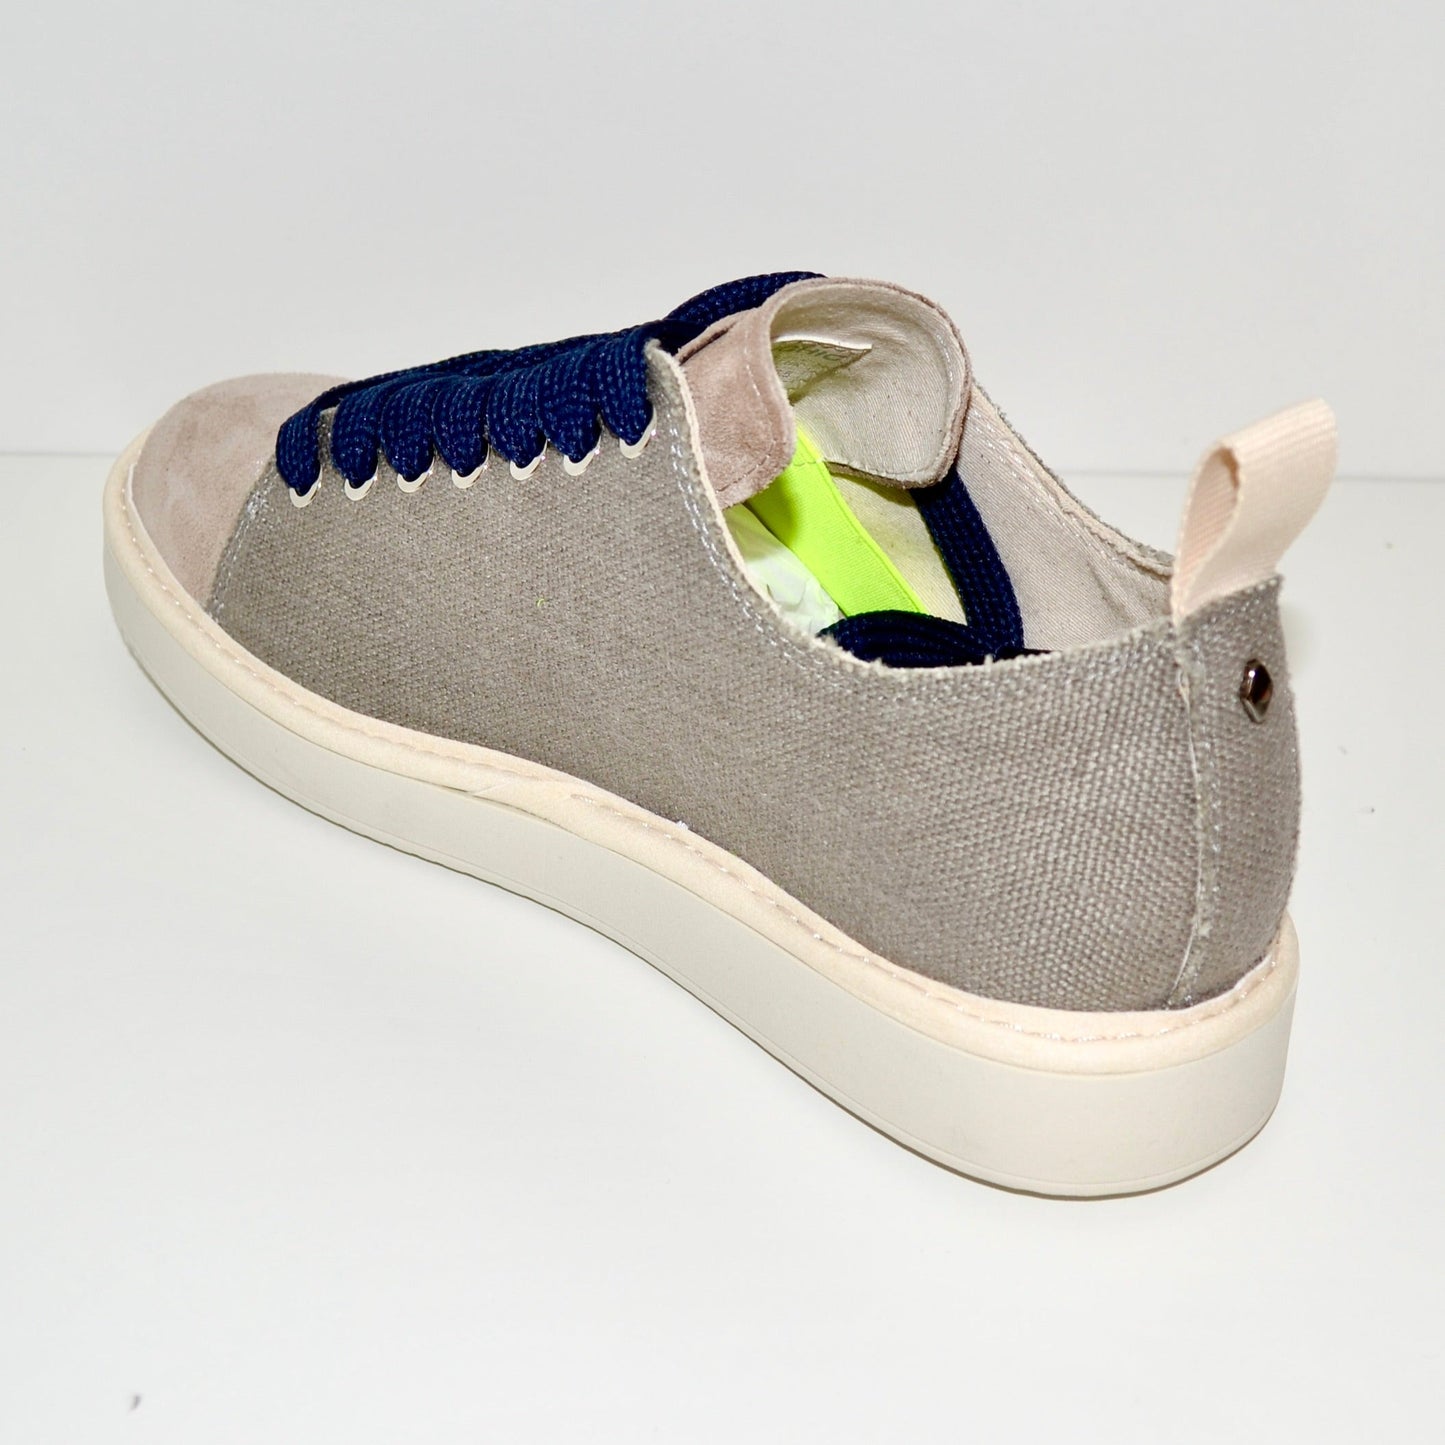 Sneakers Panchic man grey linen and suede